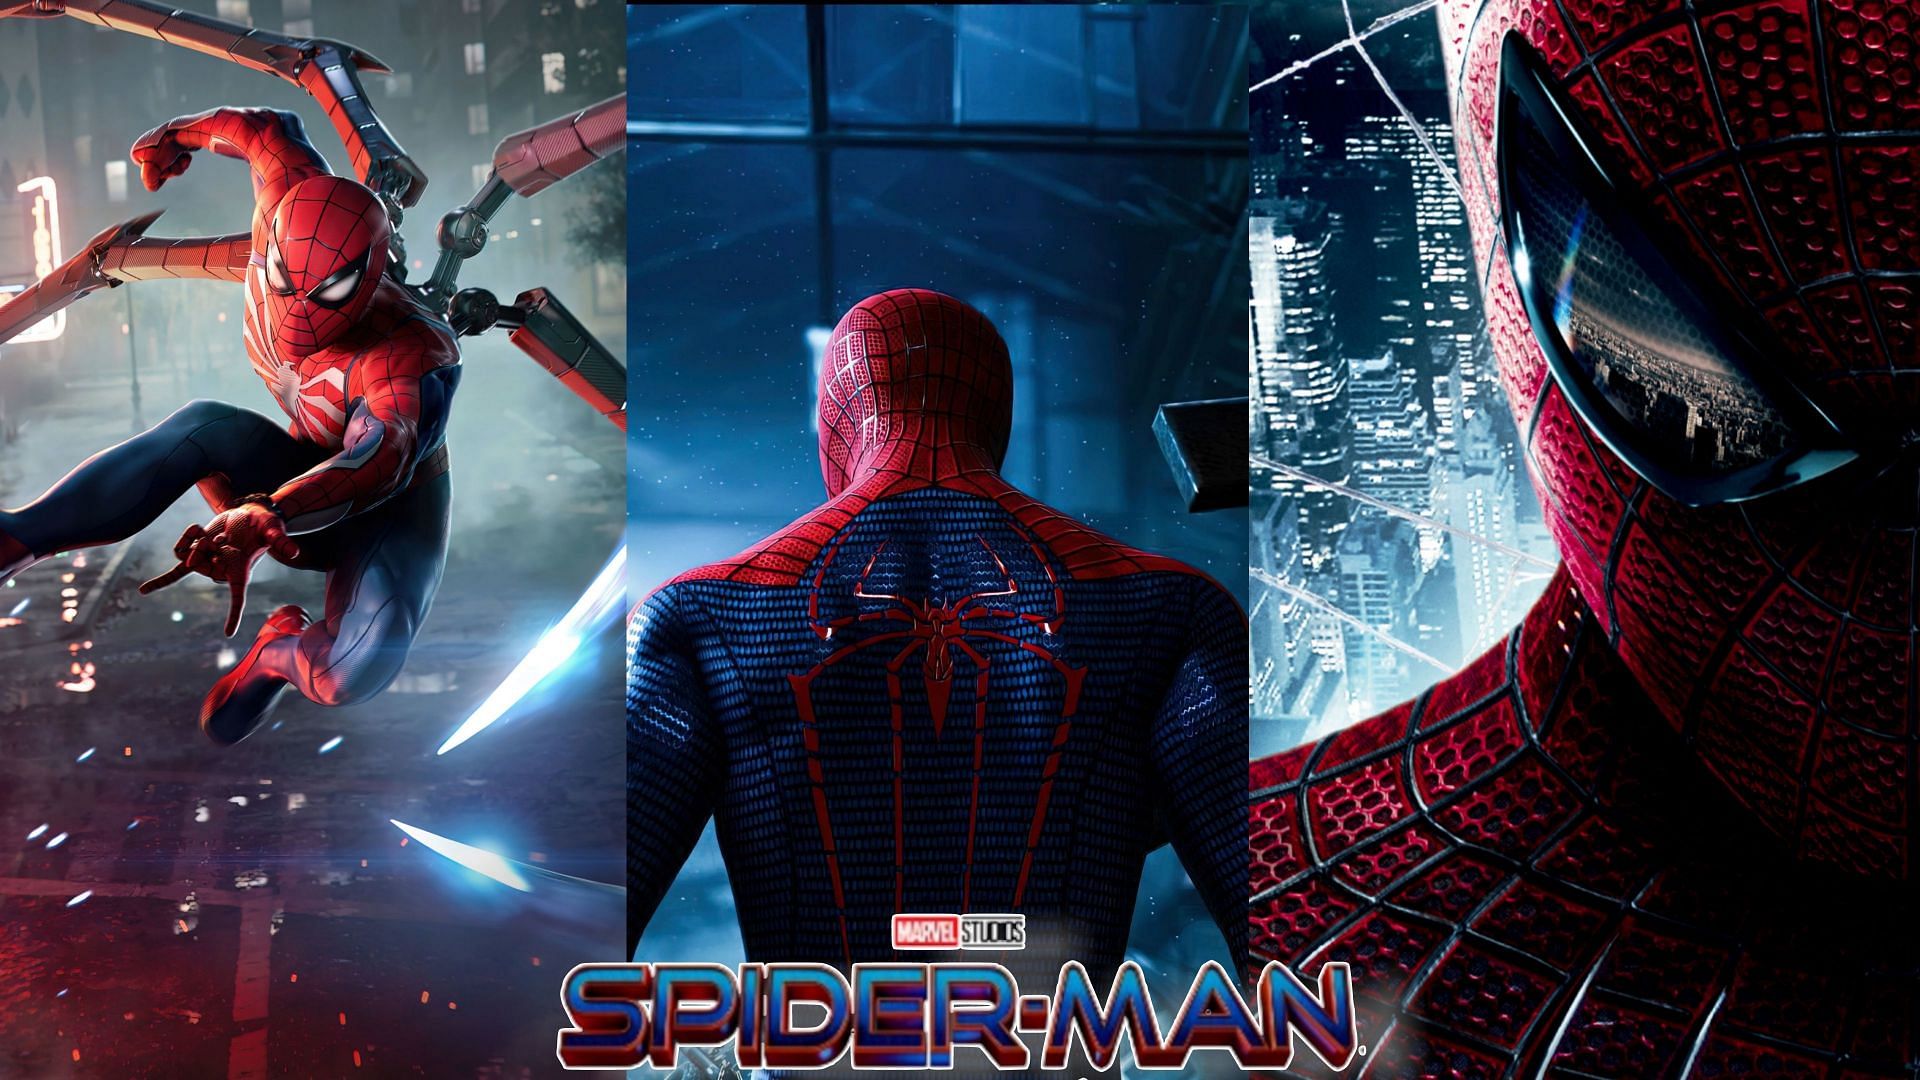 Spider-Man is a superhero who does not hold back when it comes to fighting for what is right. (Image Via Sportskeeda)